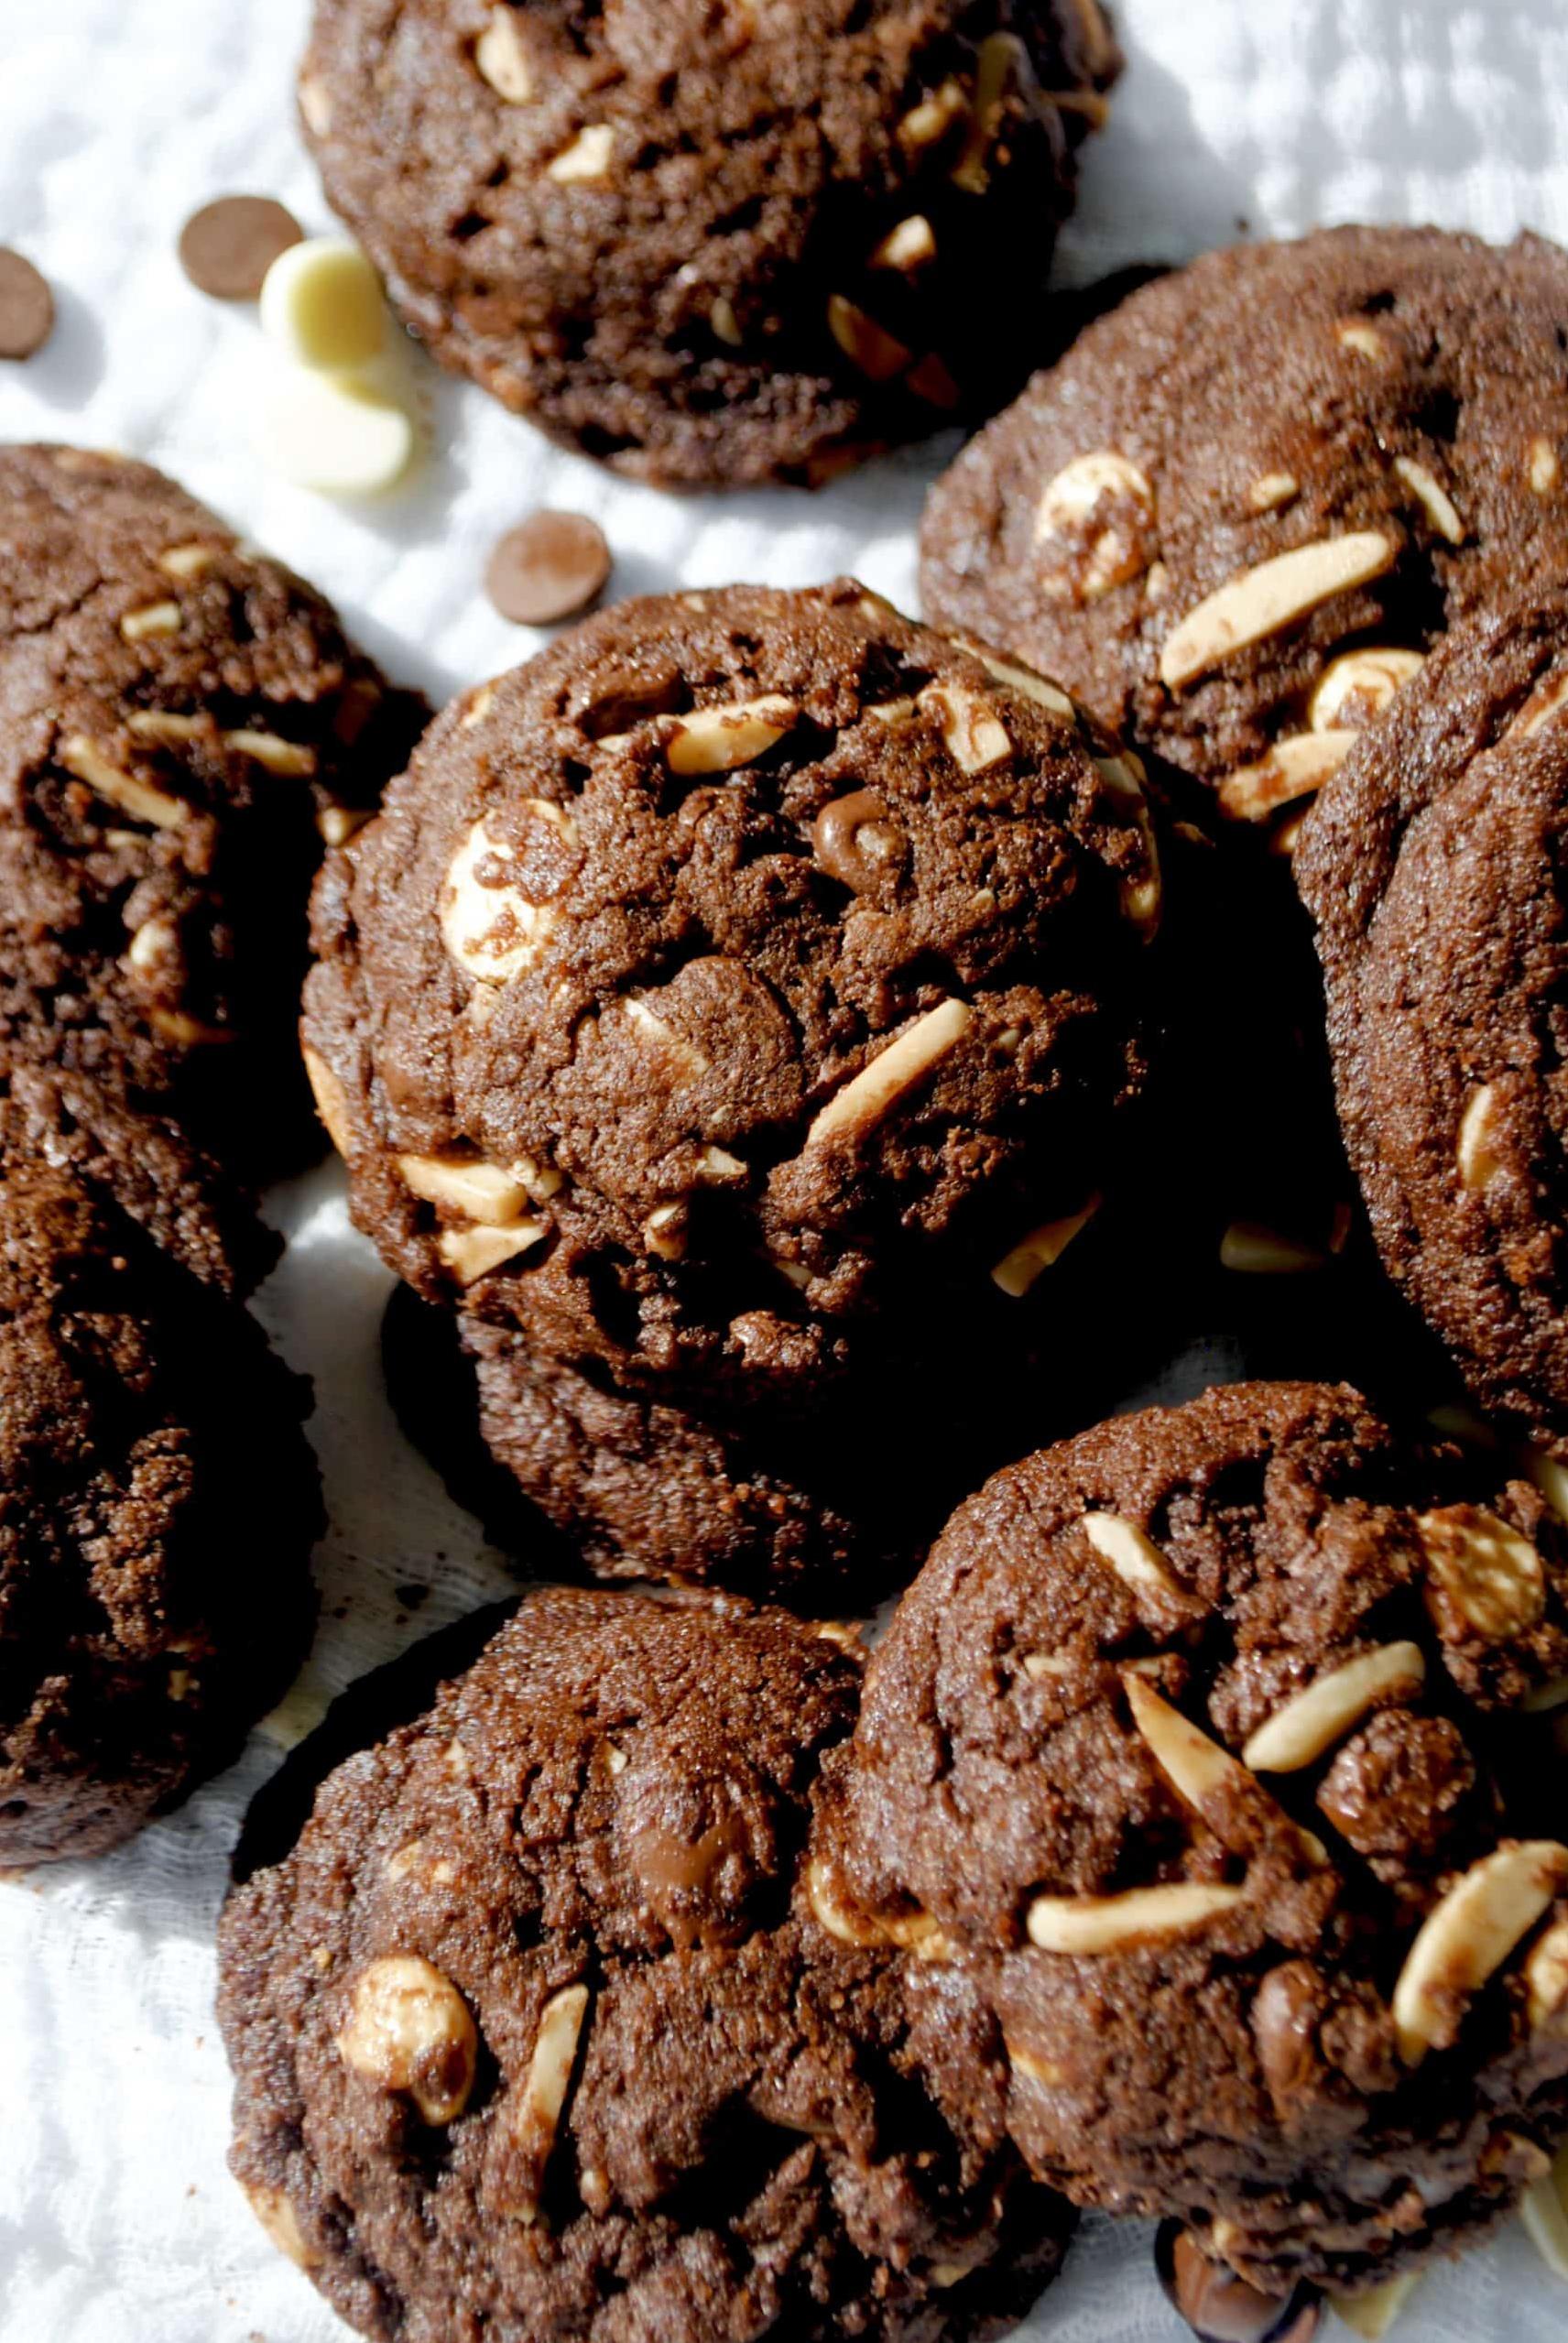  Who needs a latte when you can enjoy a caffeine kick with a crunchy bite of these cookies?